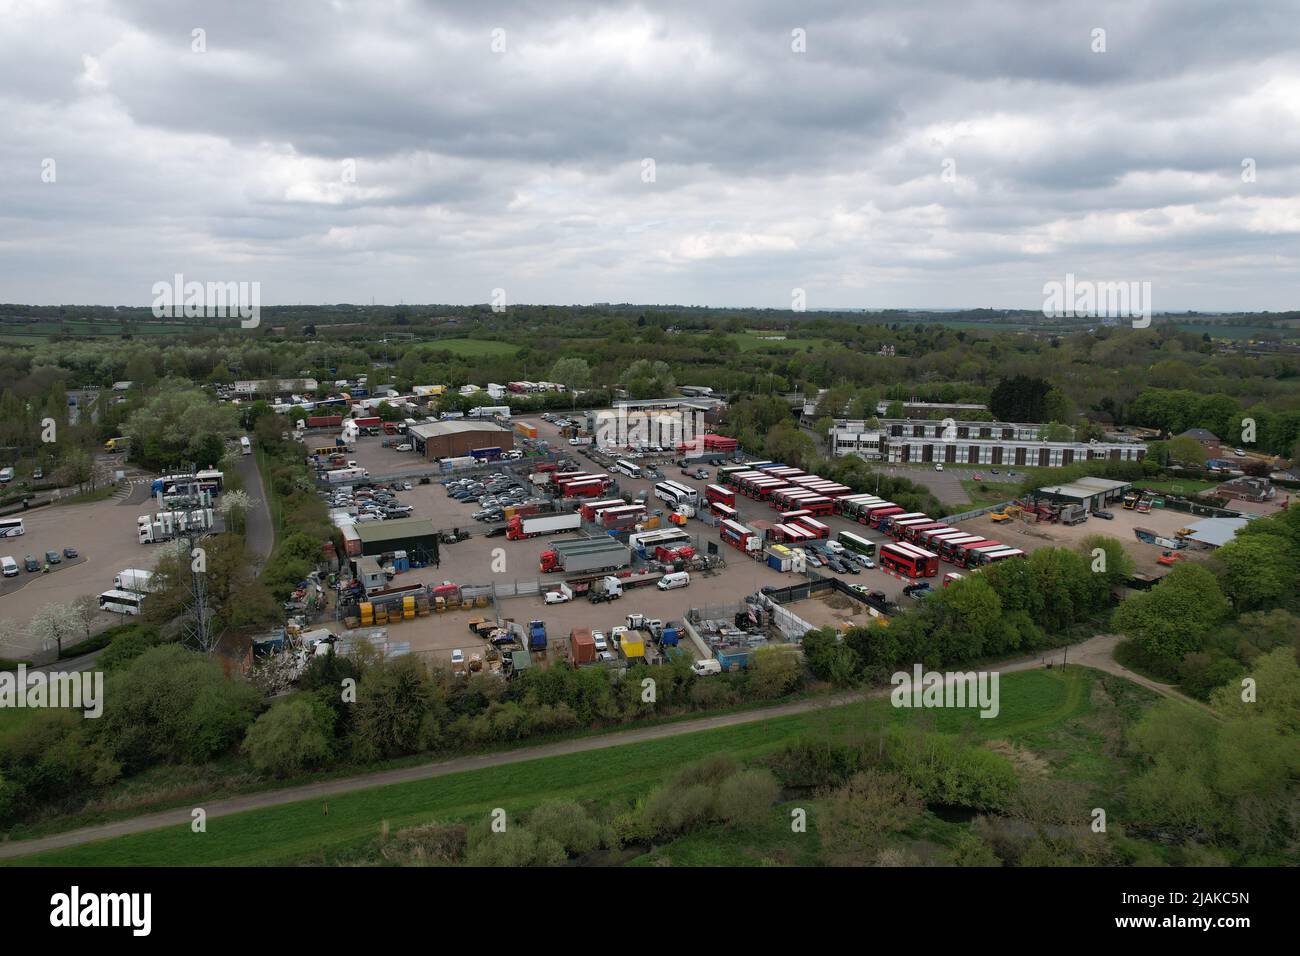 Bus depot  South Mimms Services  junction of the M25 motorway with the M1 motorway UK drone aerial view Stock Photo